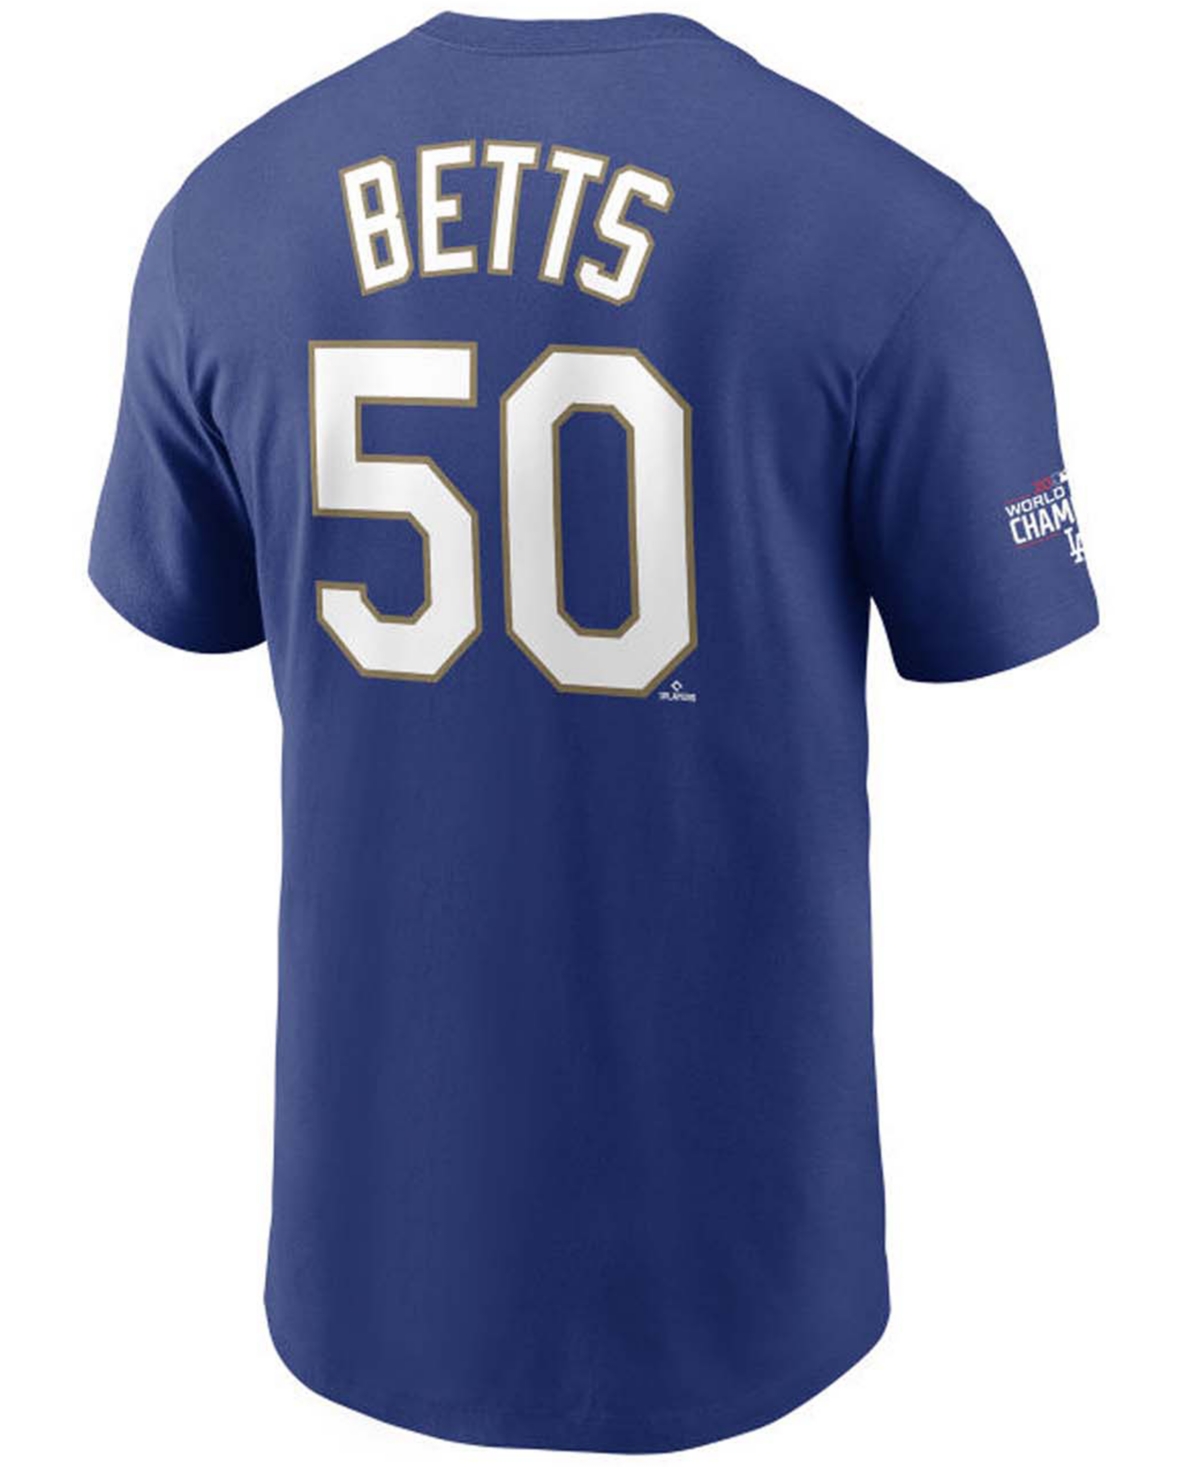 Nike Los Angeles Dodgers Men's Gold Name and Number Player T-Shirt Mookie Betts